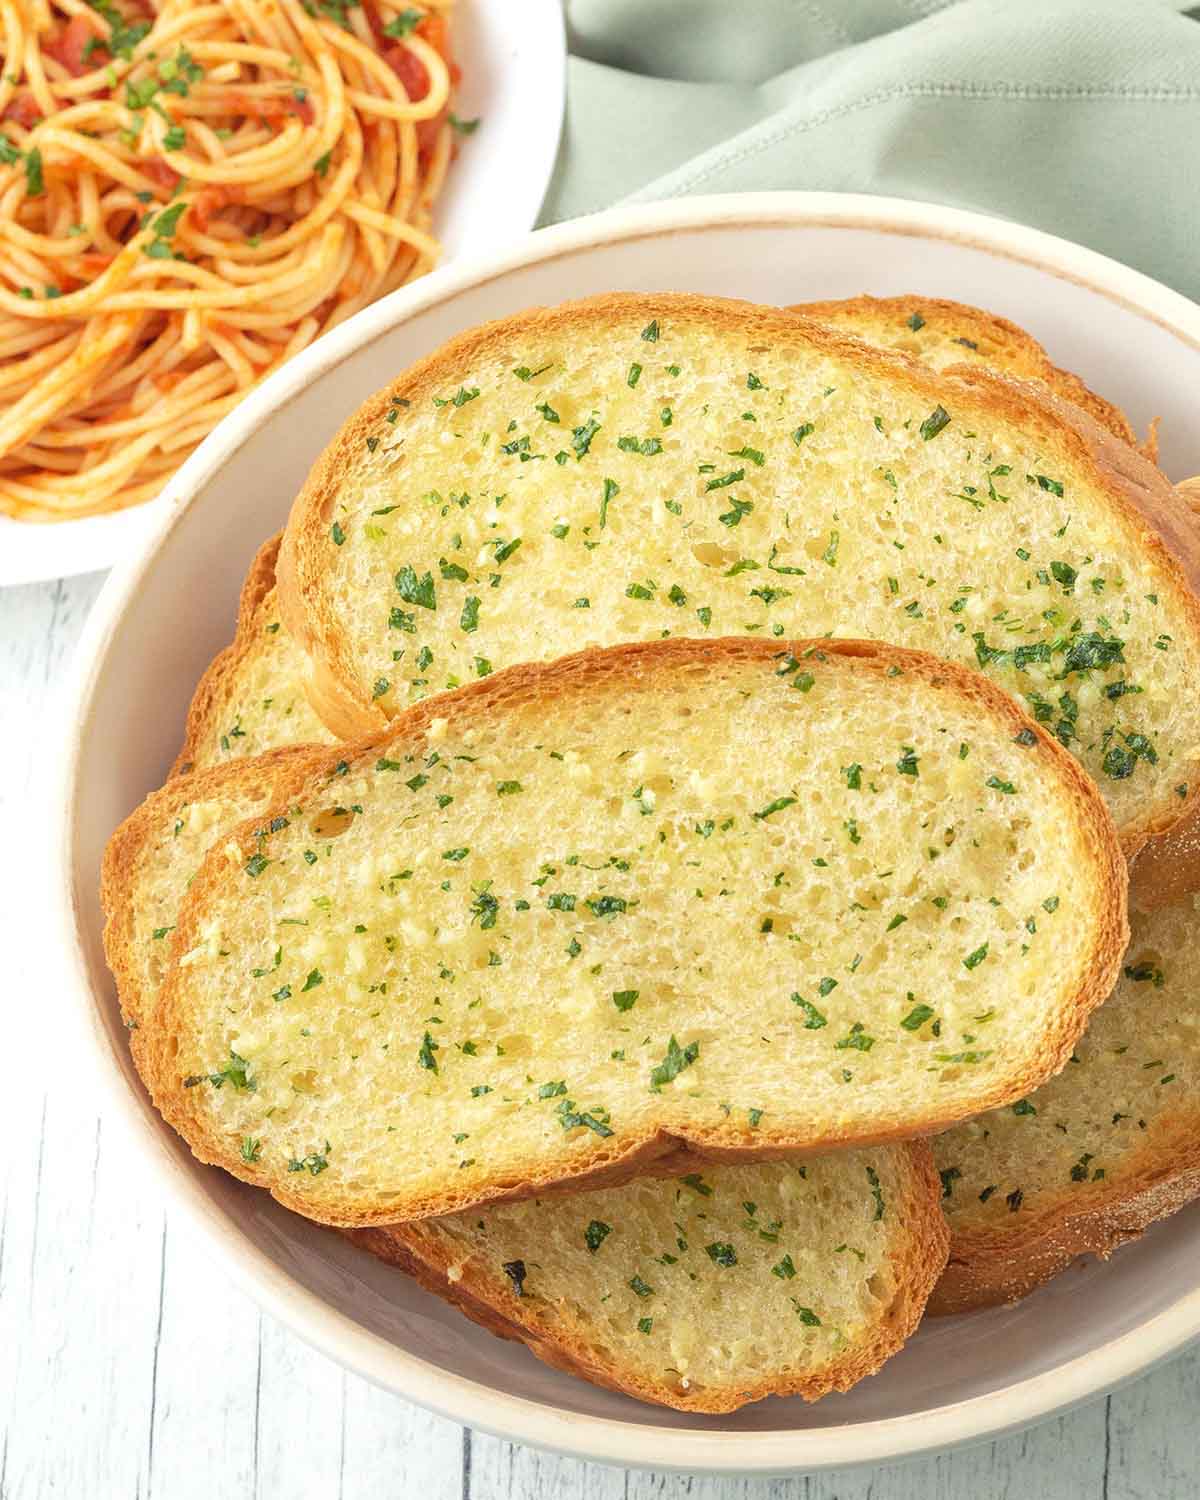 A dish of freshly made vegan garlic bread slices, a plate of spaghetti sits behind the bowl.